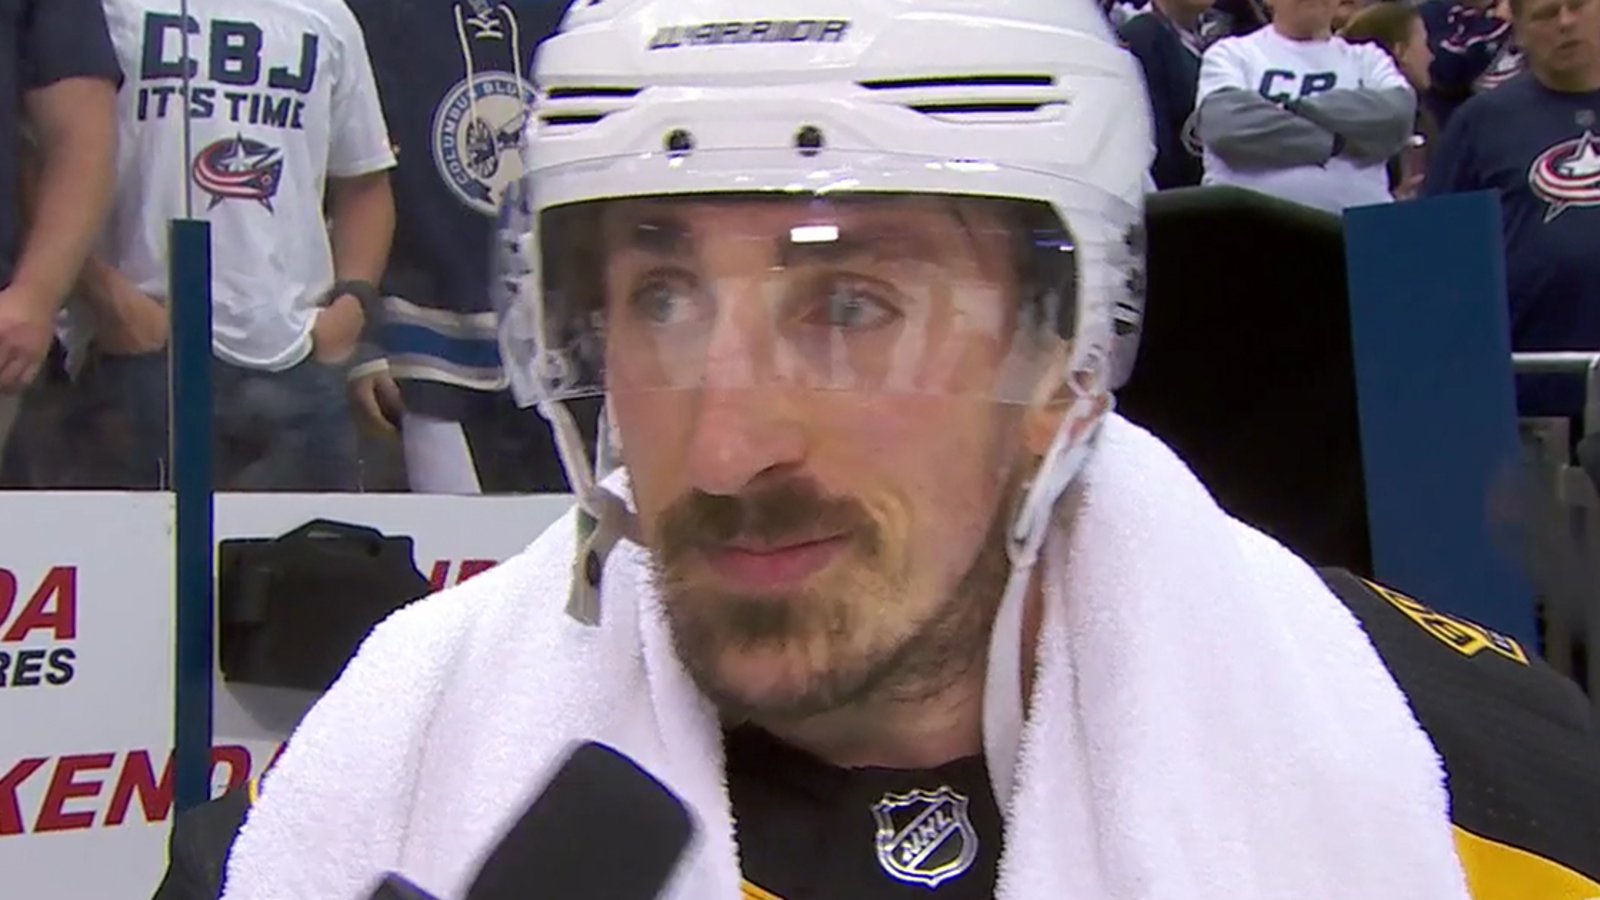 Marchand trolls everyone with his post-game comments